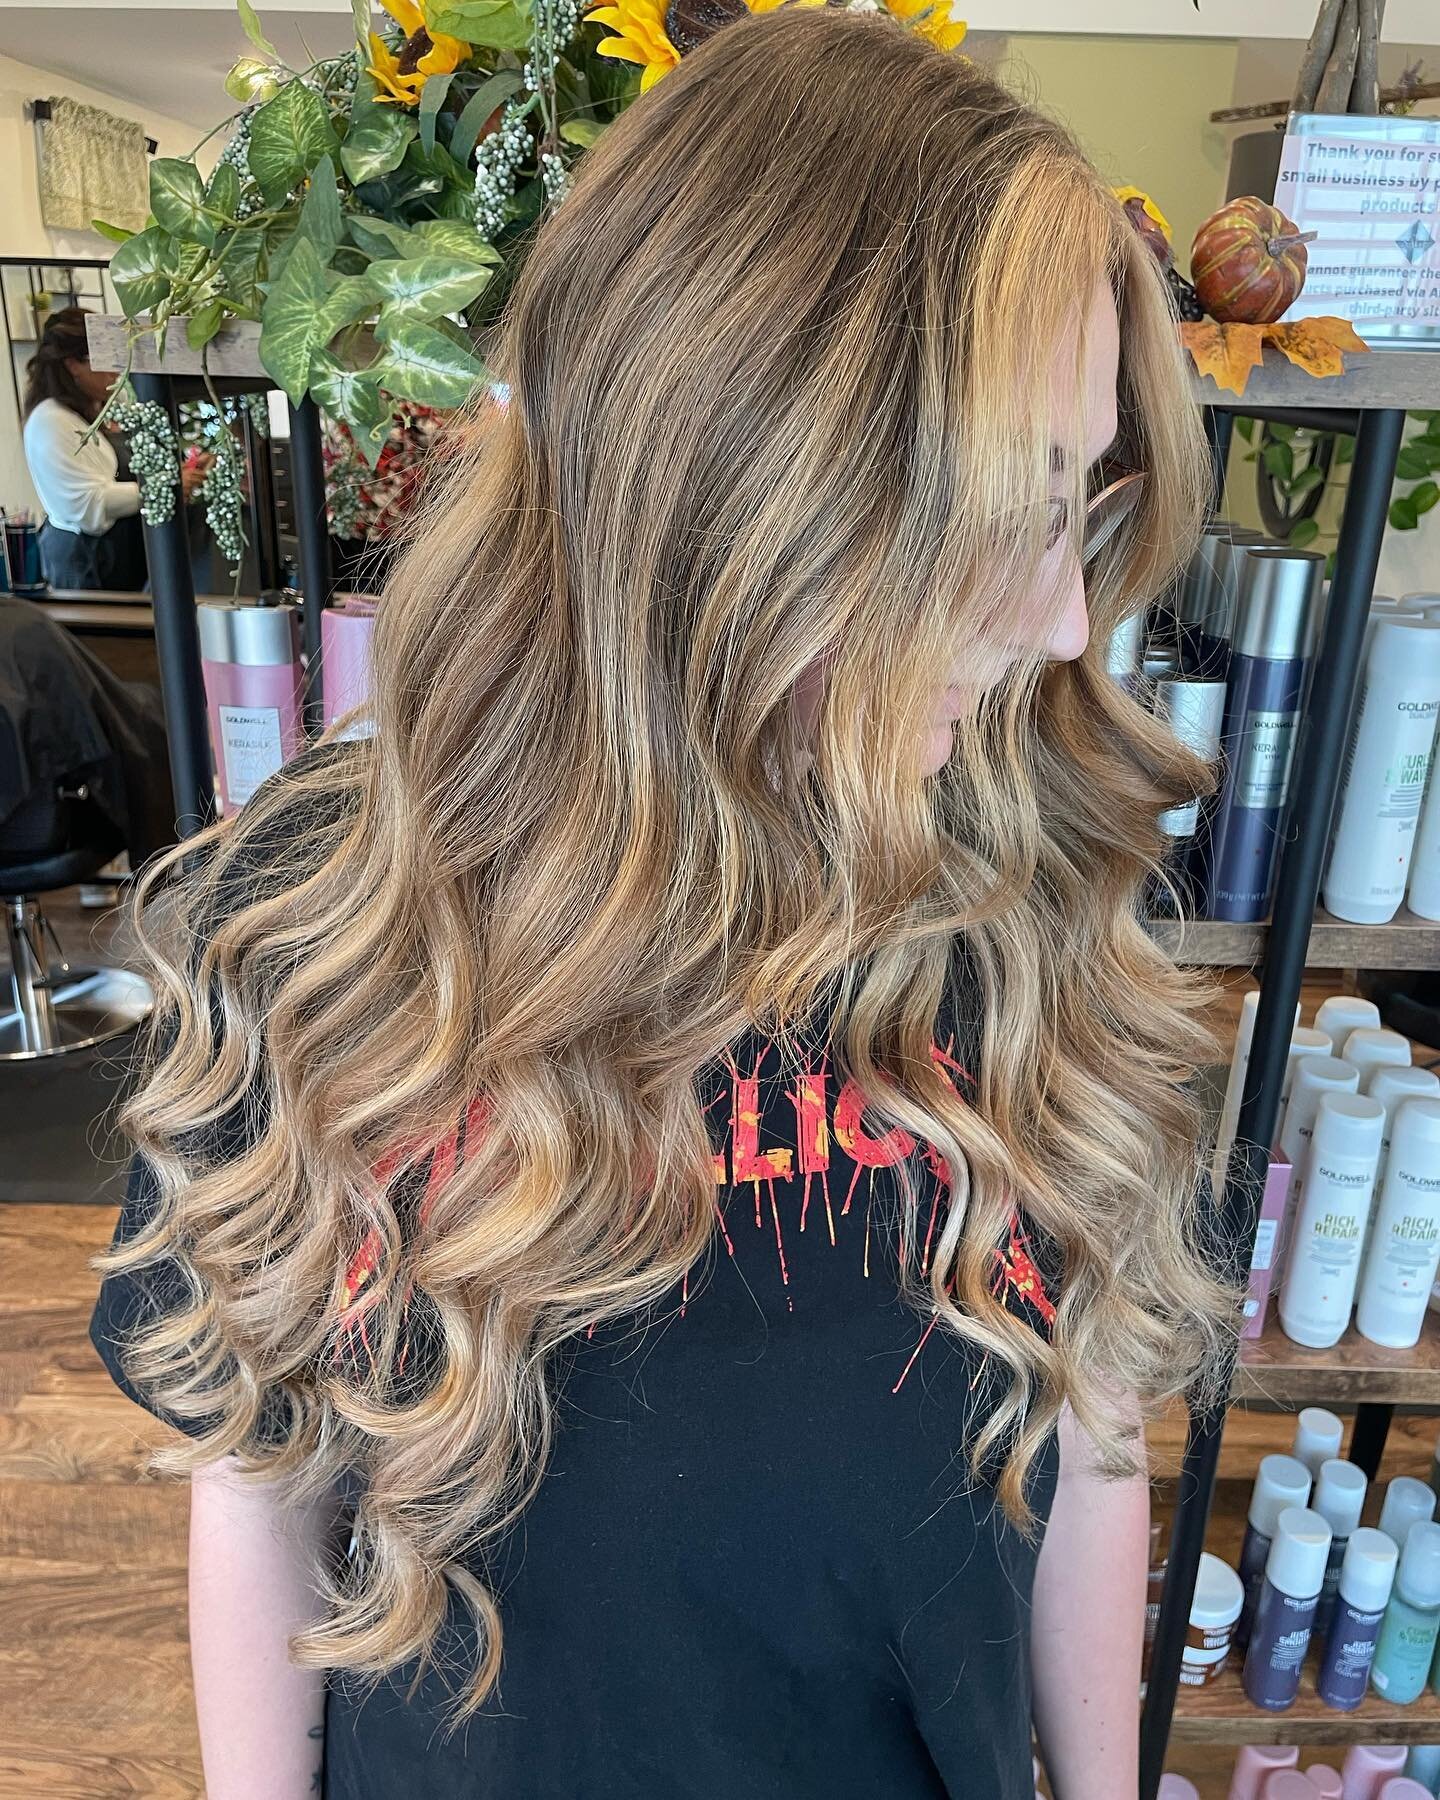 Gorgeous balayage by Alyssa Swope 
@witchy.hairdoctor 

Call us at 856.624.9140 to book your appointment. 

#goldwell #goldwellcolor #goldwellapprovedus #goldwellcolorance #goldwellpurepigments #goldwelltopchic #goldwellsalon #njsalon #njstylist #beh